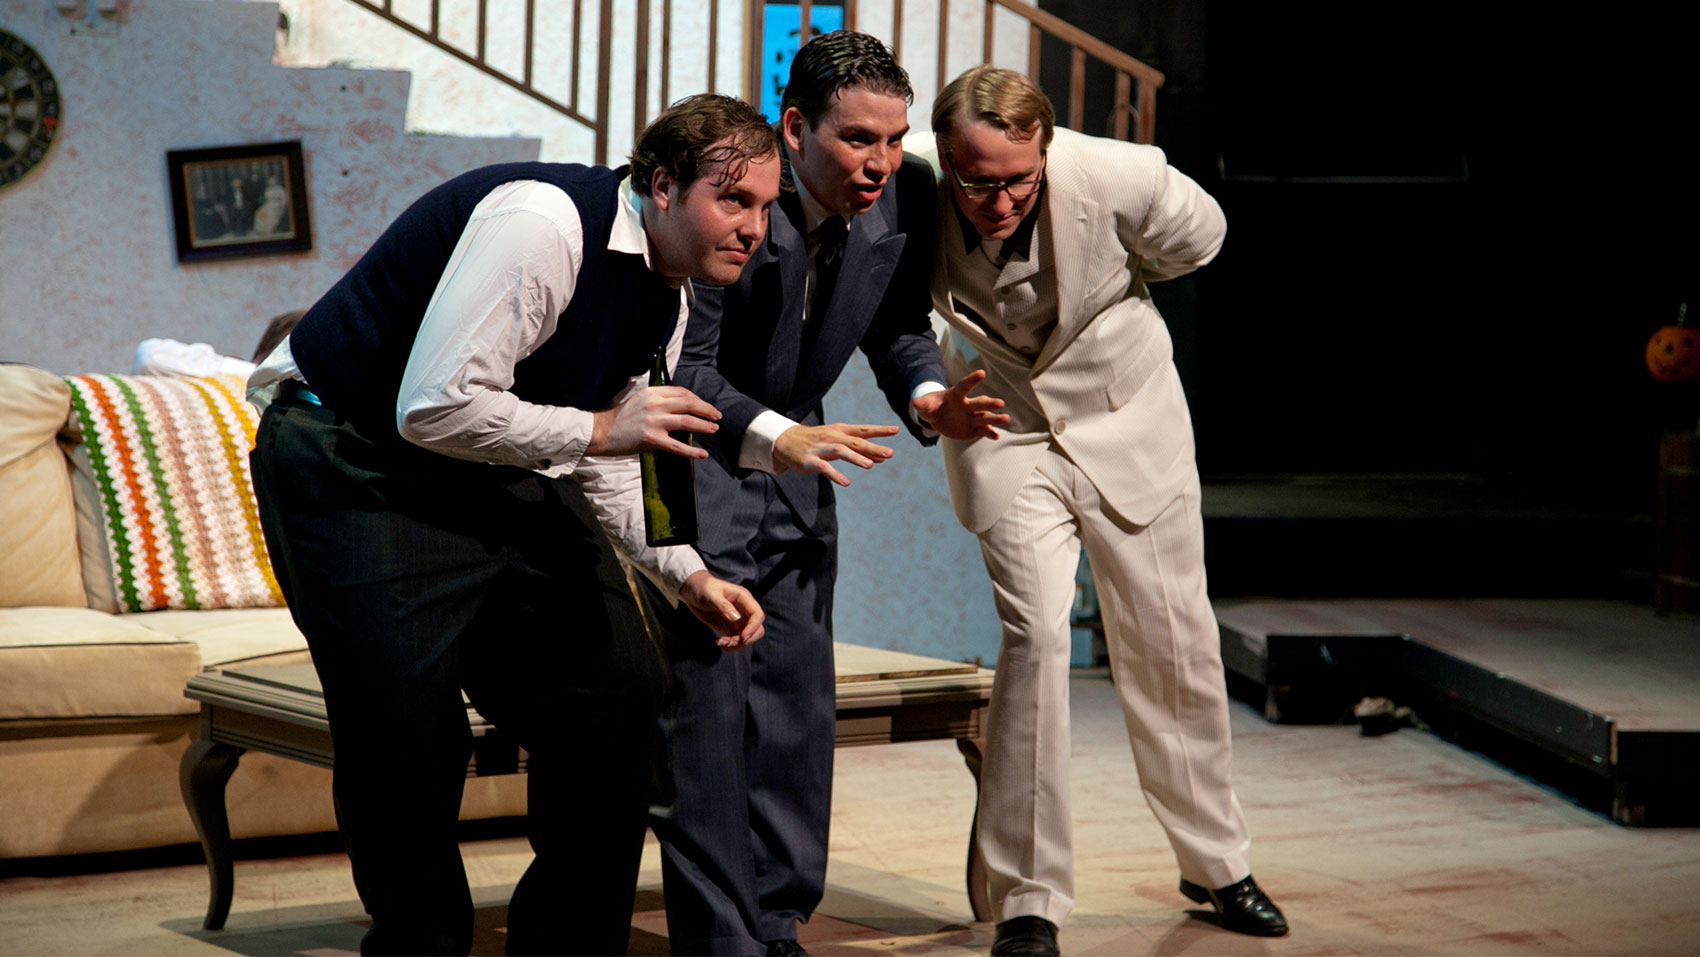 Three men are huddled near each other in conversation, one man has his hands raised low as if gesturing about something, the man on the left is leaning in toward the man in the middle to listen while raising a hand slightly while the man on the right is leaning in toward the man in the middle listening with a hand behind his back. 